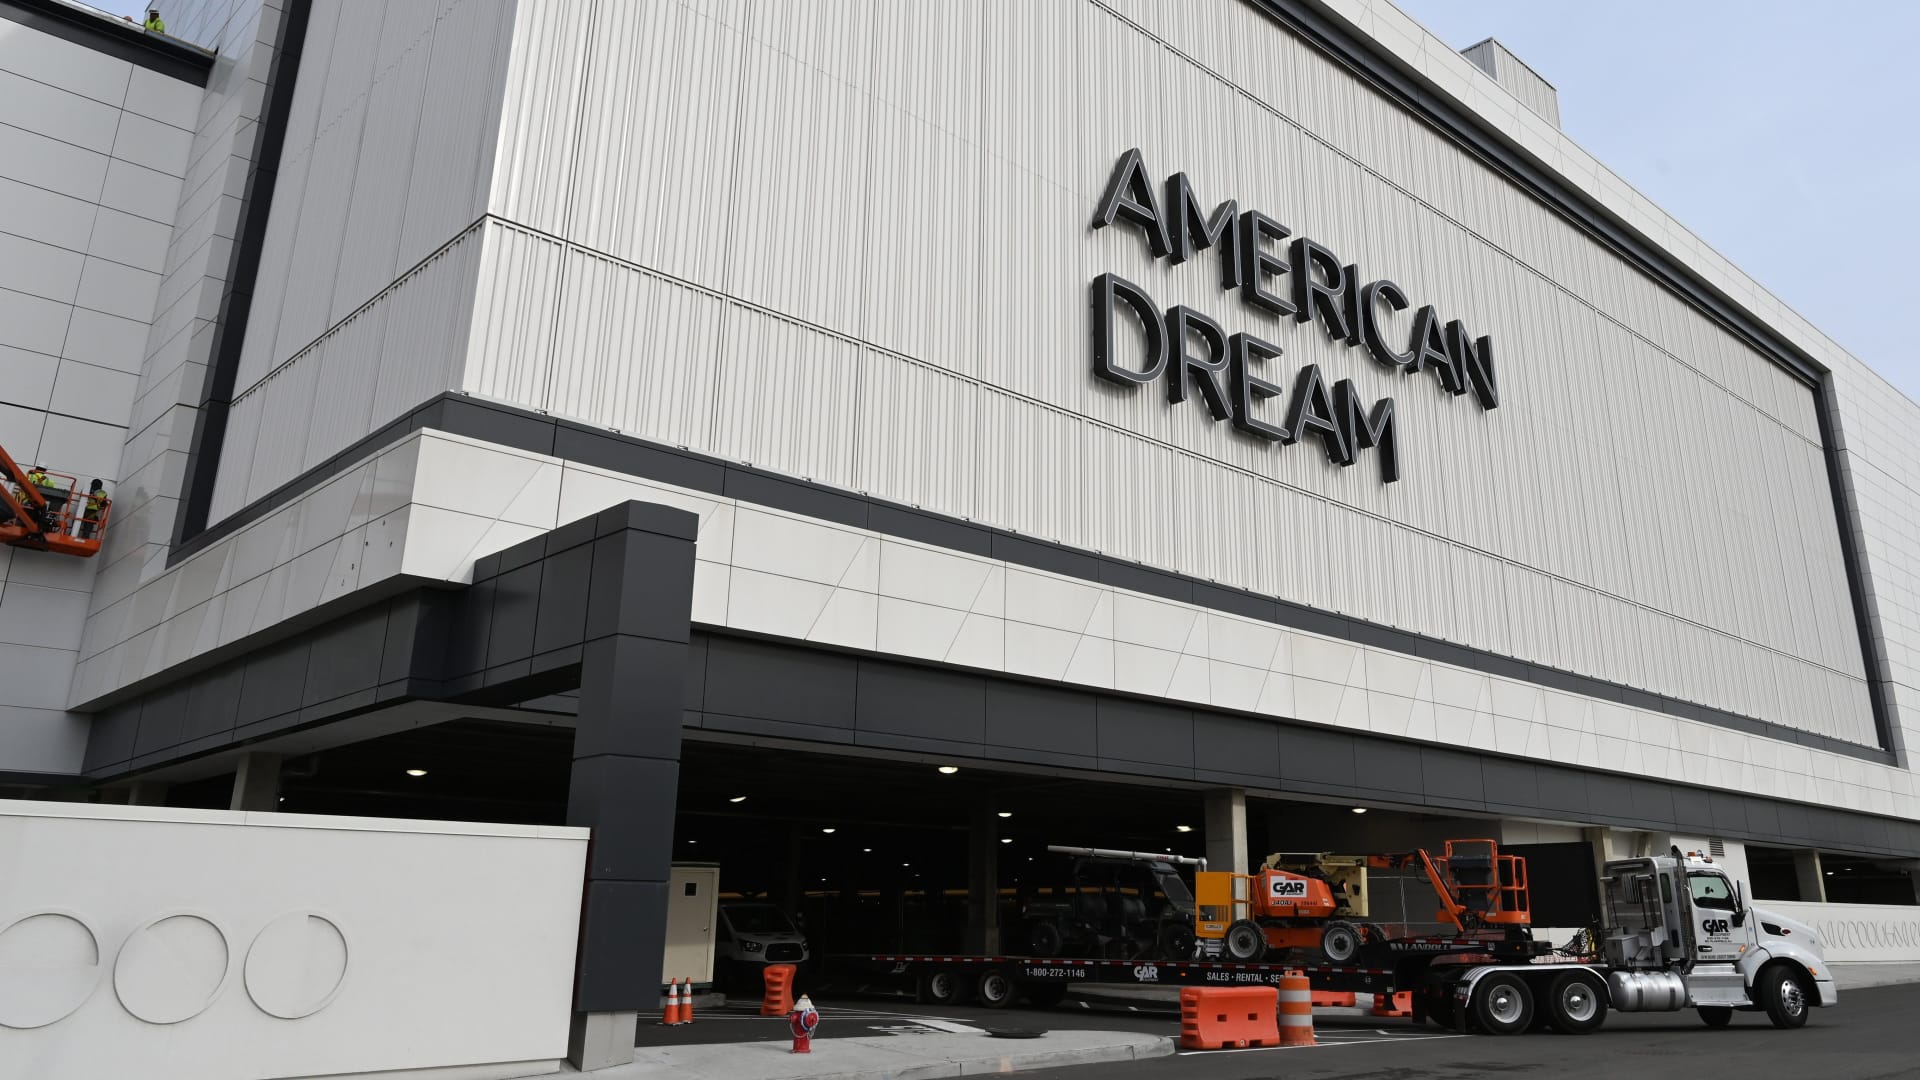 American Dream mall in N.J. briefly evacuated on Black Friday over bomb menace